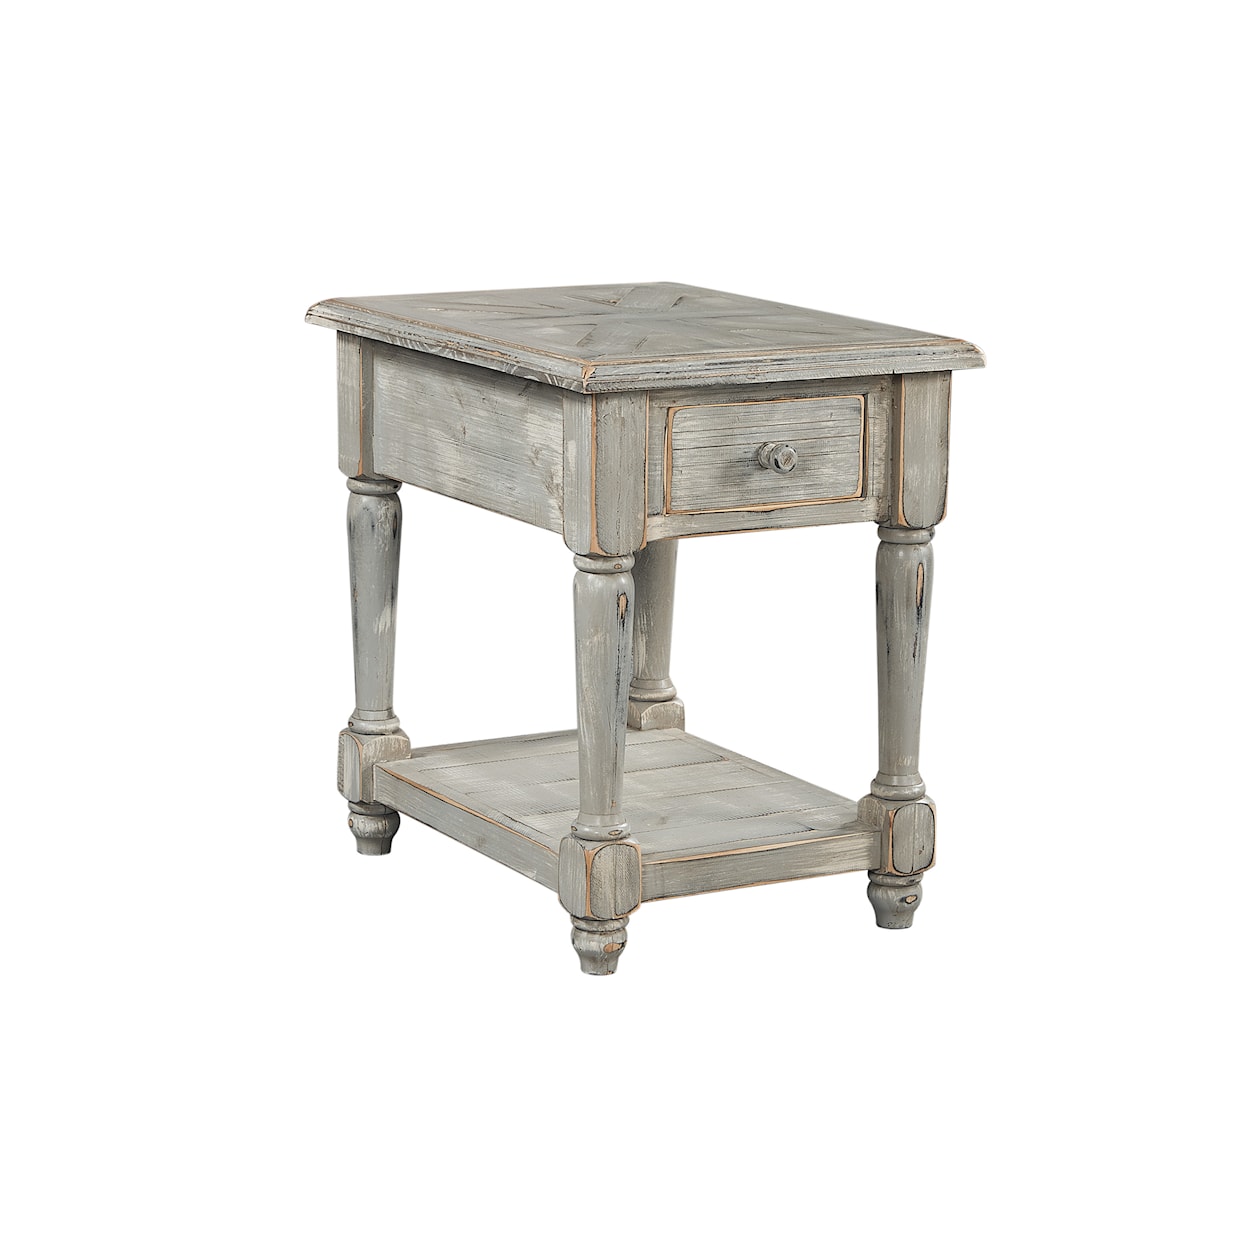 Aspenhome Hinsdale Chairside Table